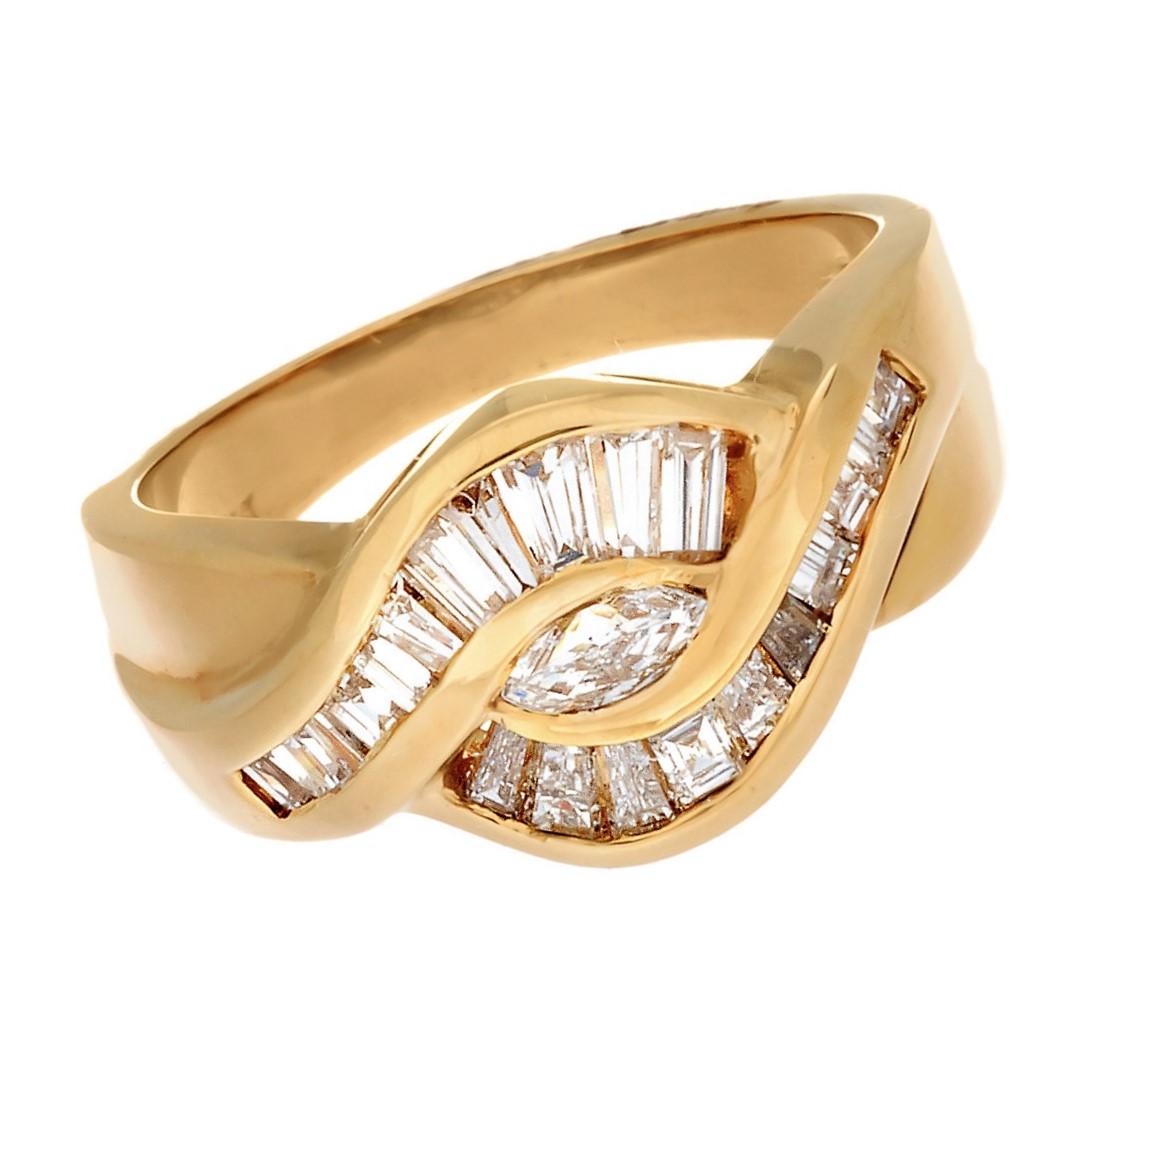 18K Yellow Gold Ribbon Style Marquise and Baguette Diamond Ring .
Set With 1-Marquise cut diamond and 21 Baguette cut diamonds to total 0.82 carats, and 1 Marquise Diamond 0.12Ct.
Total Weight  0.94 Carats 
Width: 11 mm
tapers to 3.5 mm
Size 6.5 